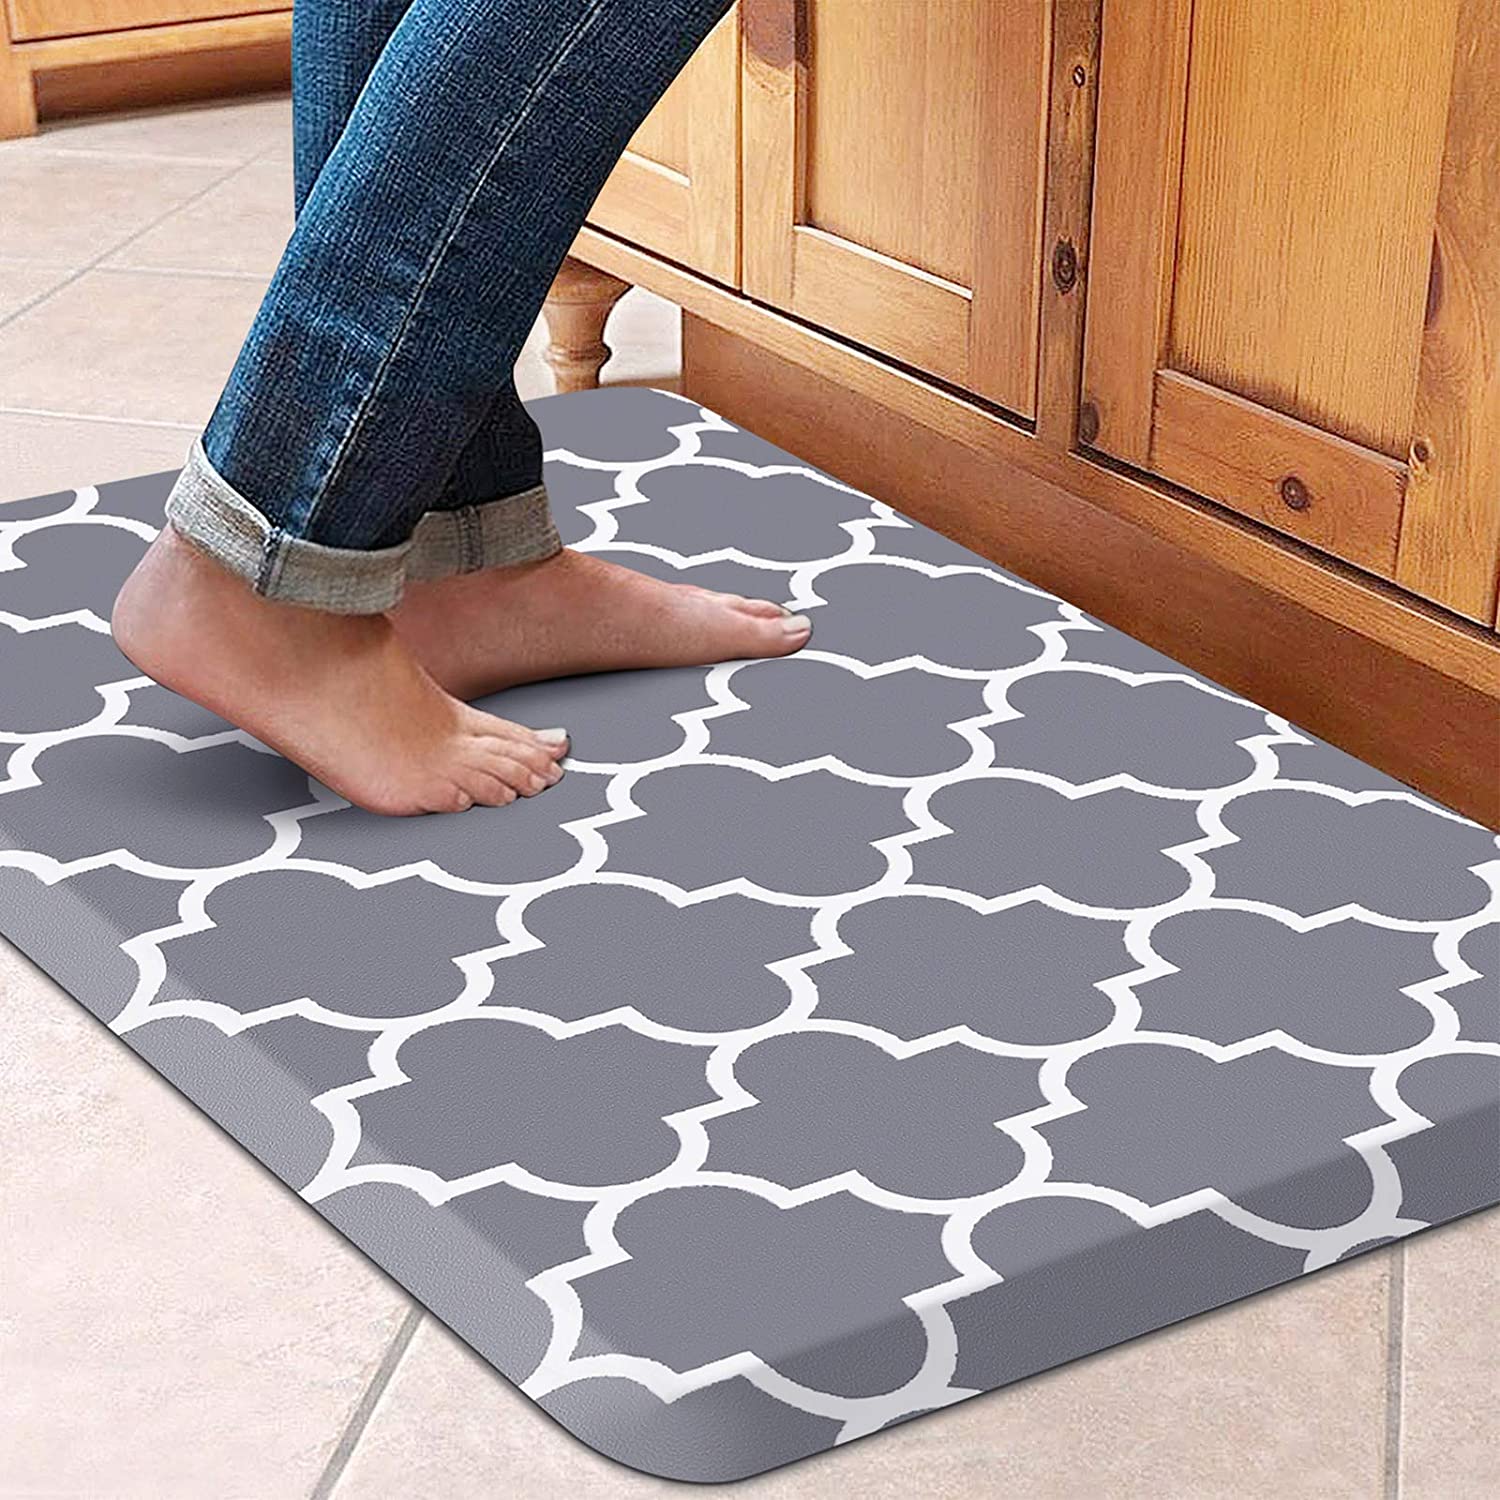 WISELIFE Kitchen Mat and Rugs Cushioned Anti-Fatigue Kitchen mats ,17.3x  28,Non Slip Waterproof Kitchen Mats and Rugs Ergonomic Comfort Mat for  Kitchen, Floor Home, Office, Sink, Laundry , Grey, Scove